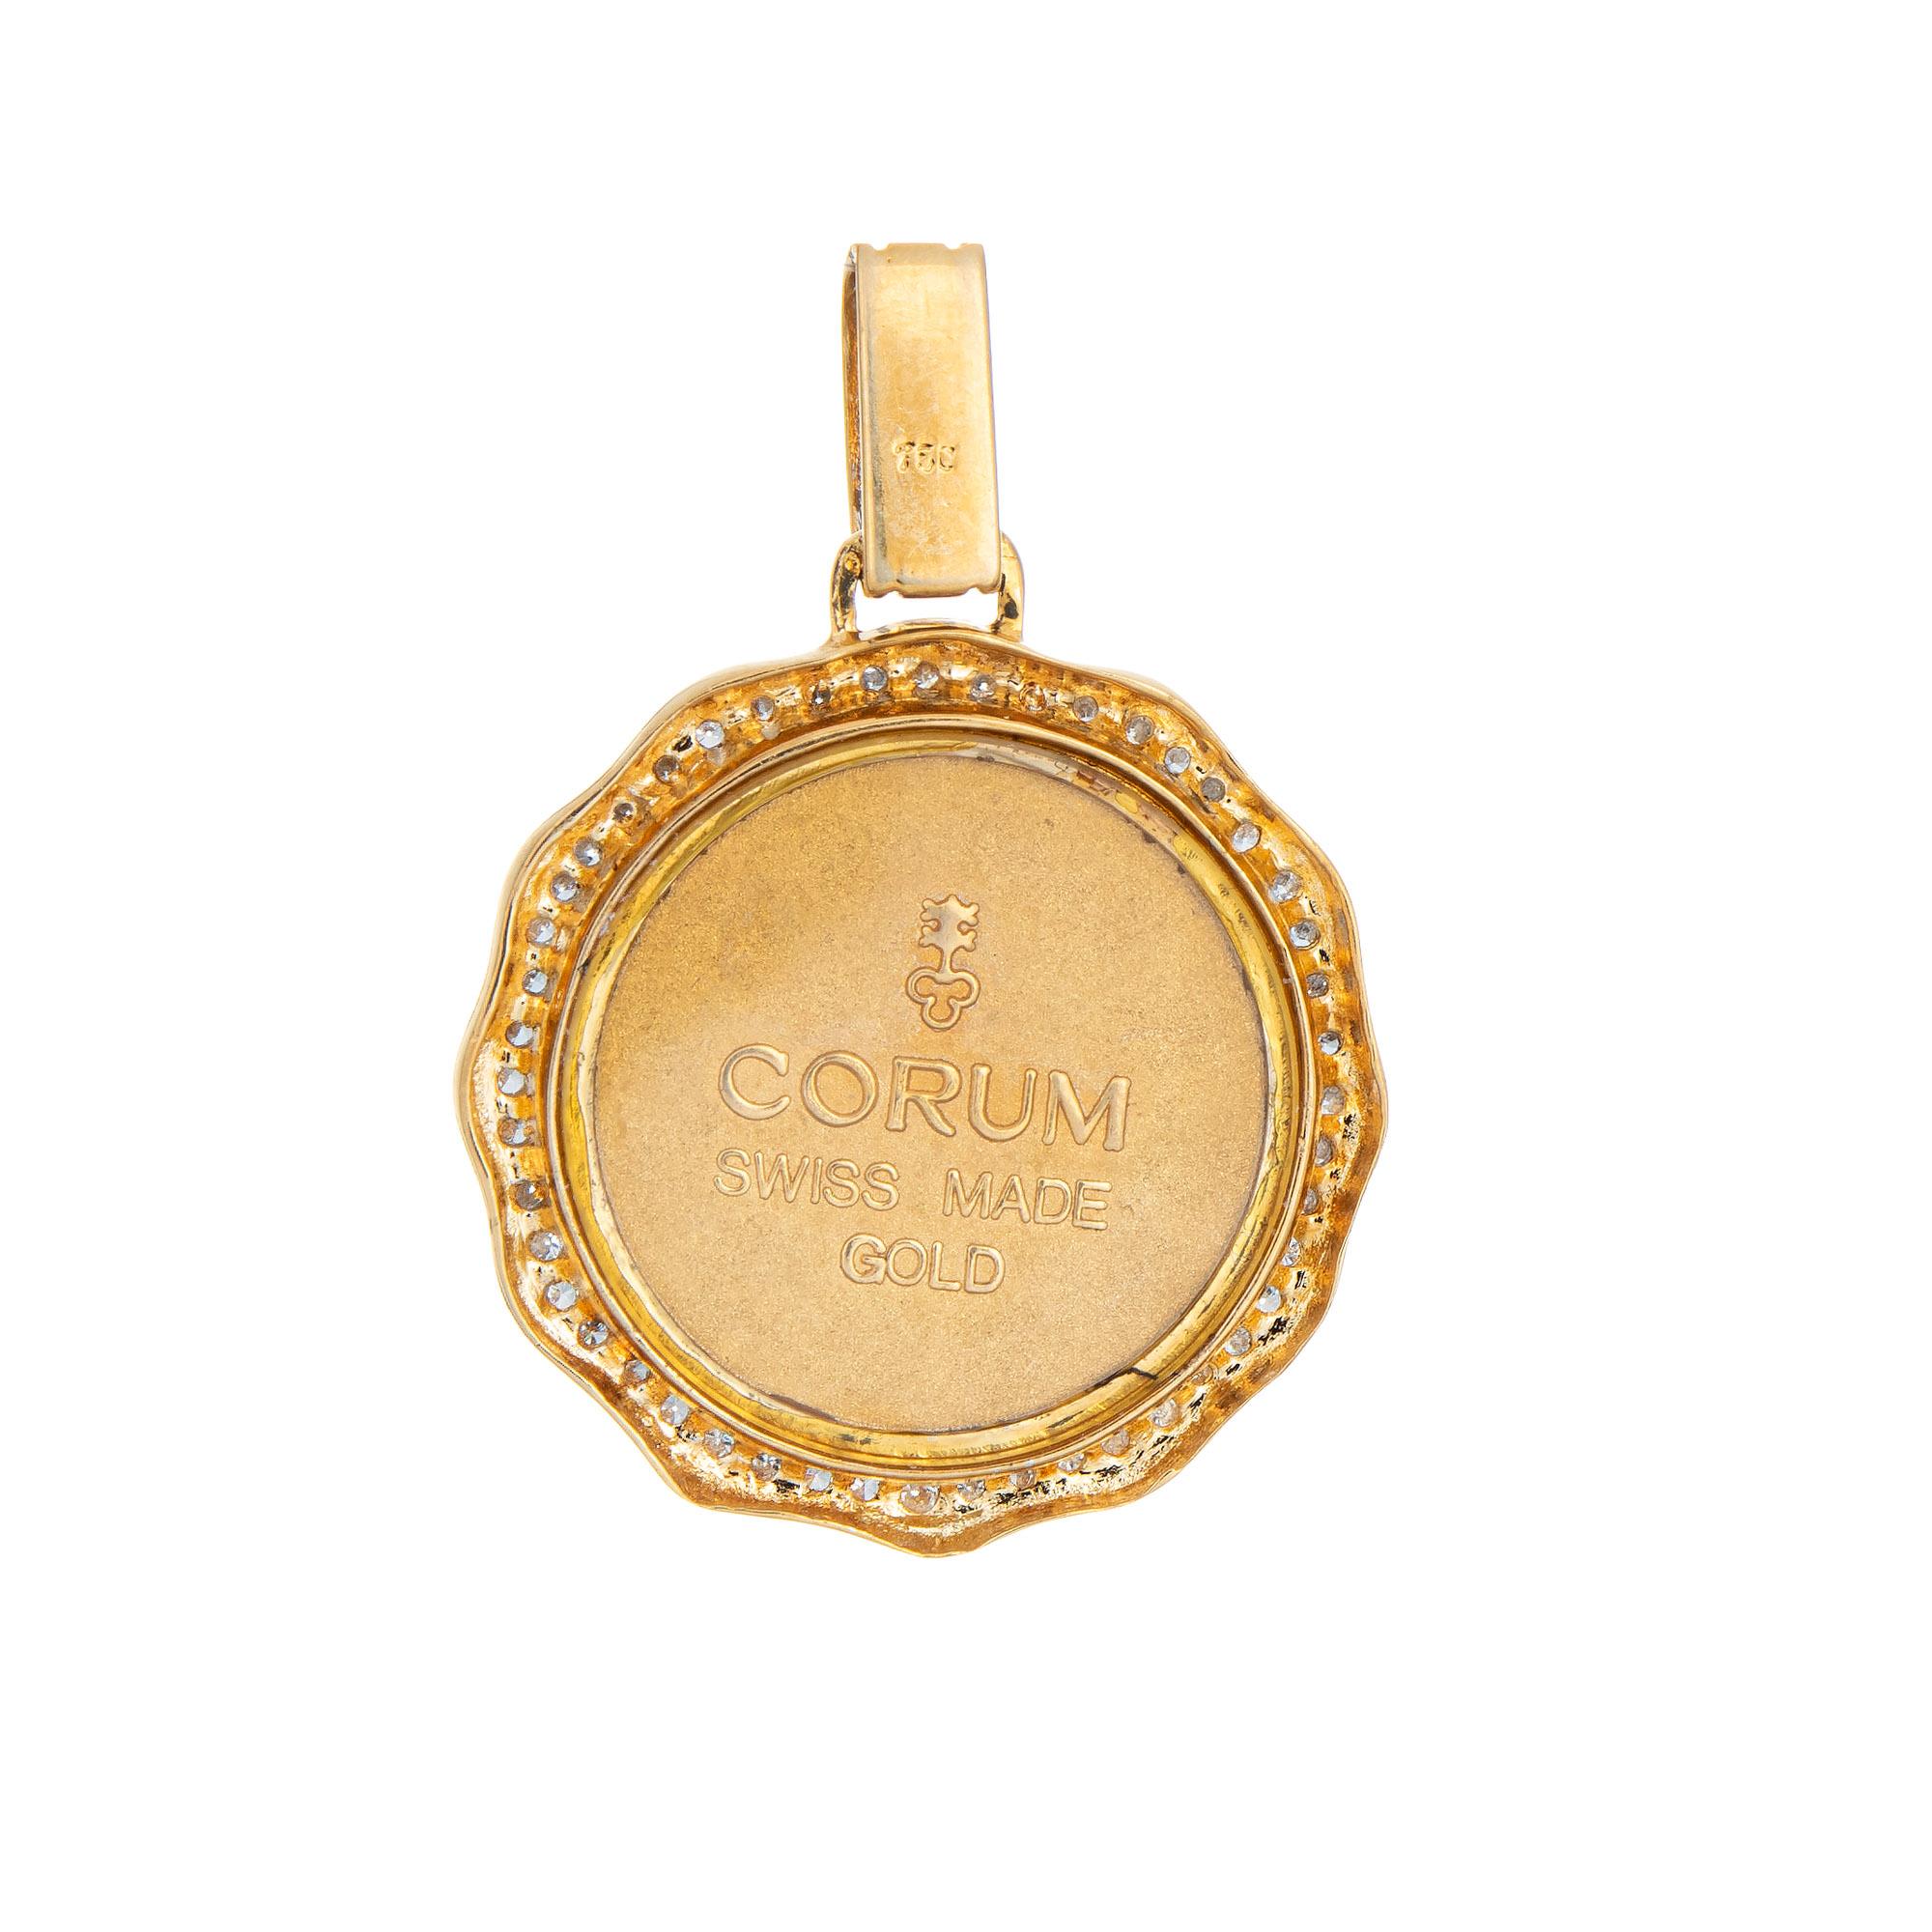 Vintage Corum Admirals Cup diamond pendant, crafted in 18 karat yellow gold.  

Round brilliant cut diamonds total an estimated 0.57 carats (estimated at H-I color and VS2-IS1 clarity).

The Admirals collection was born 60 years ago with the